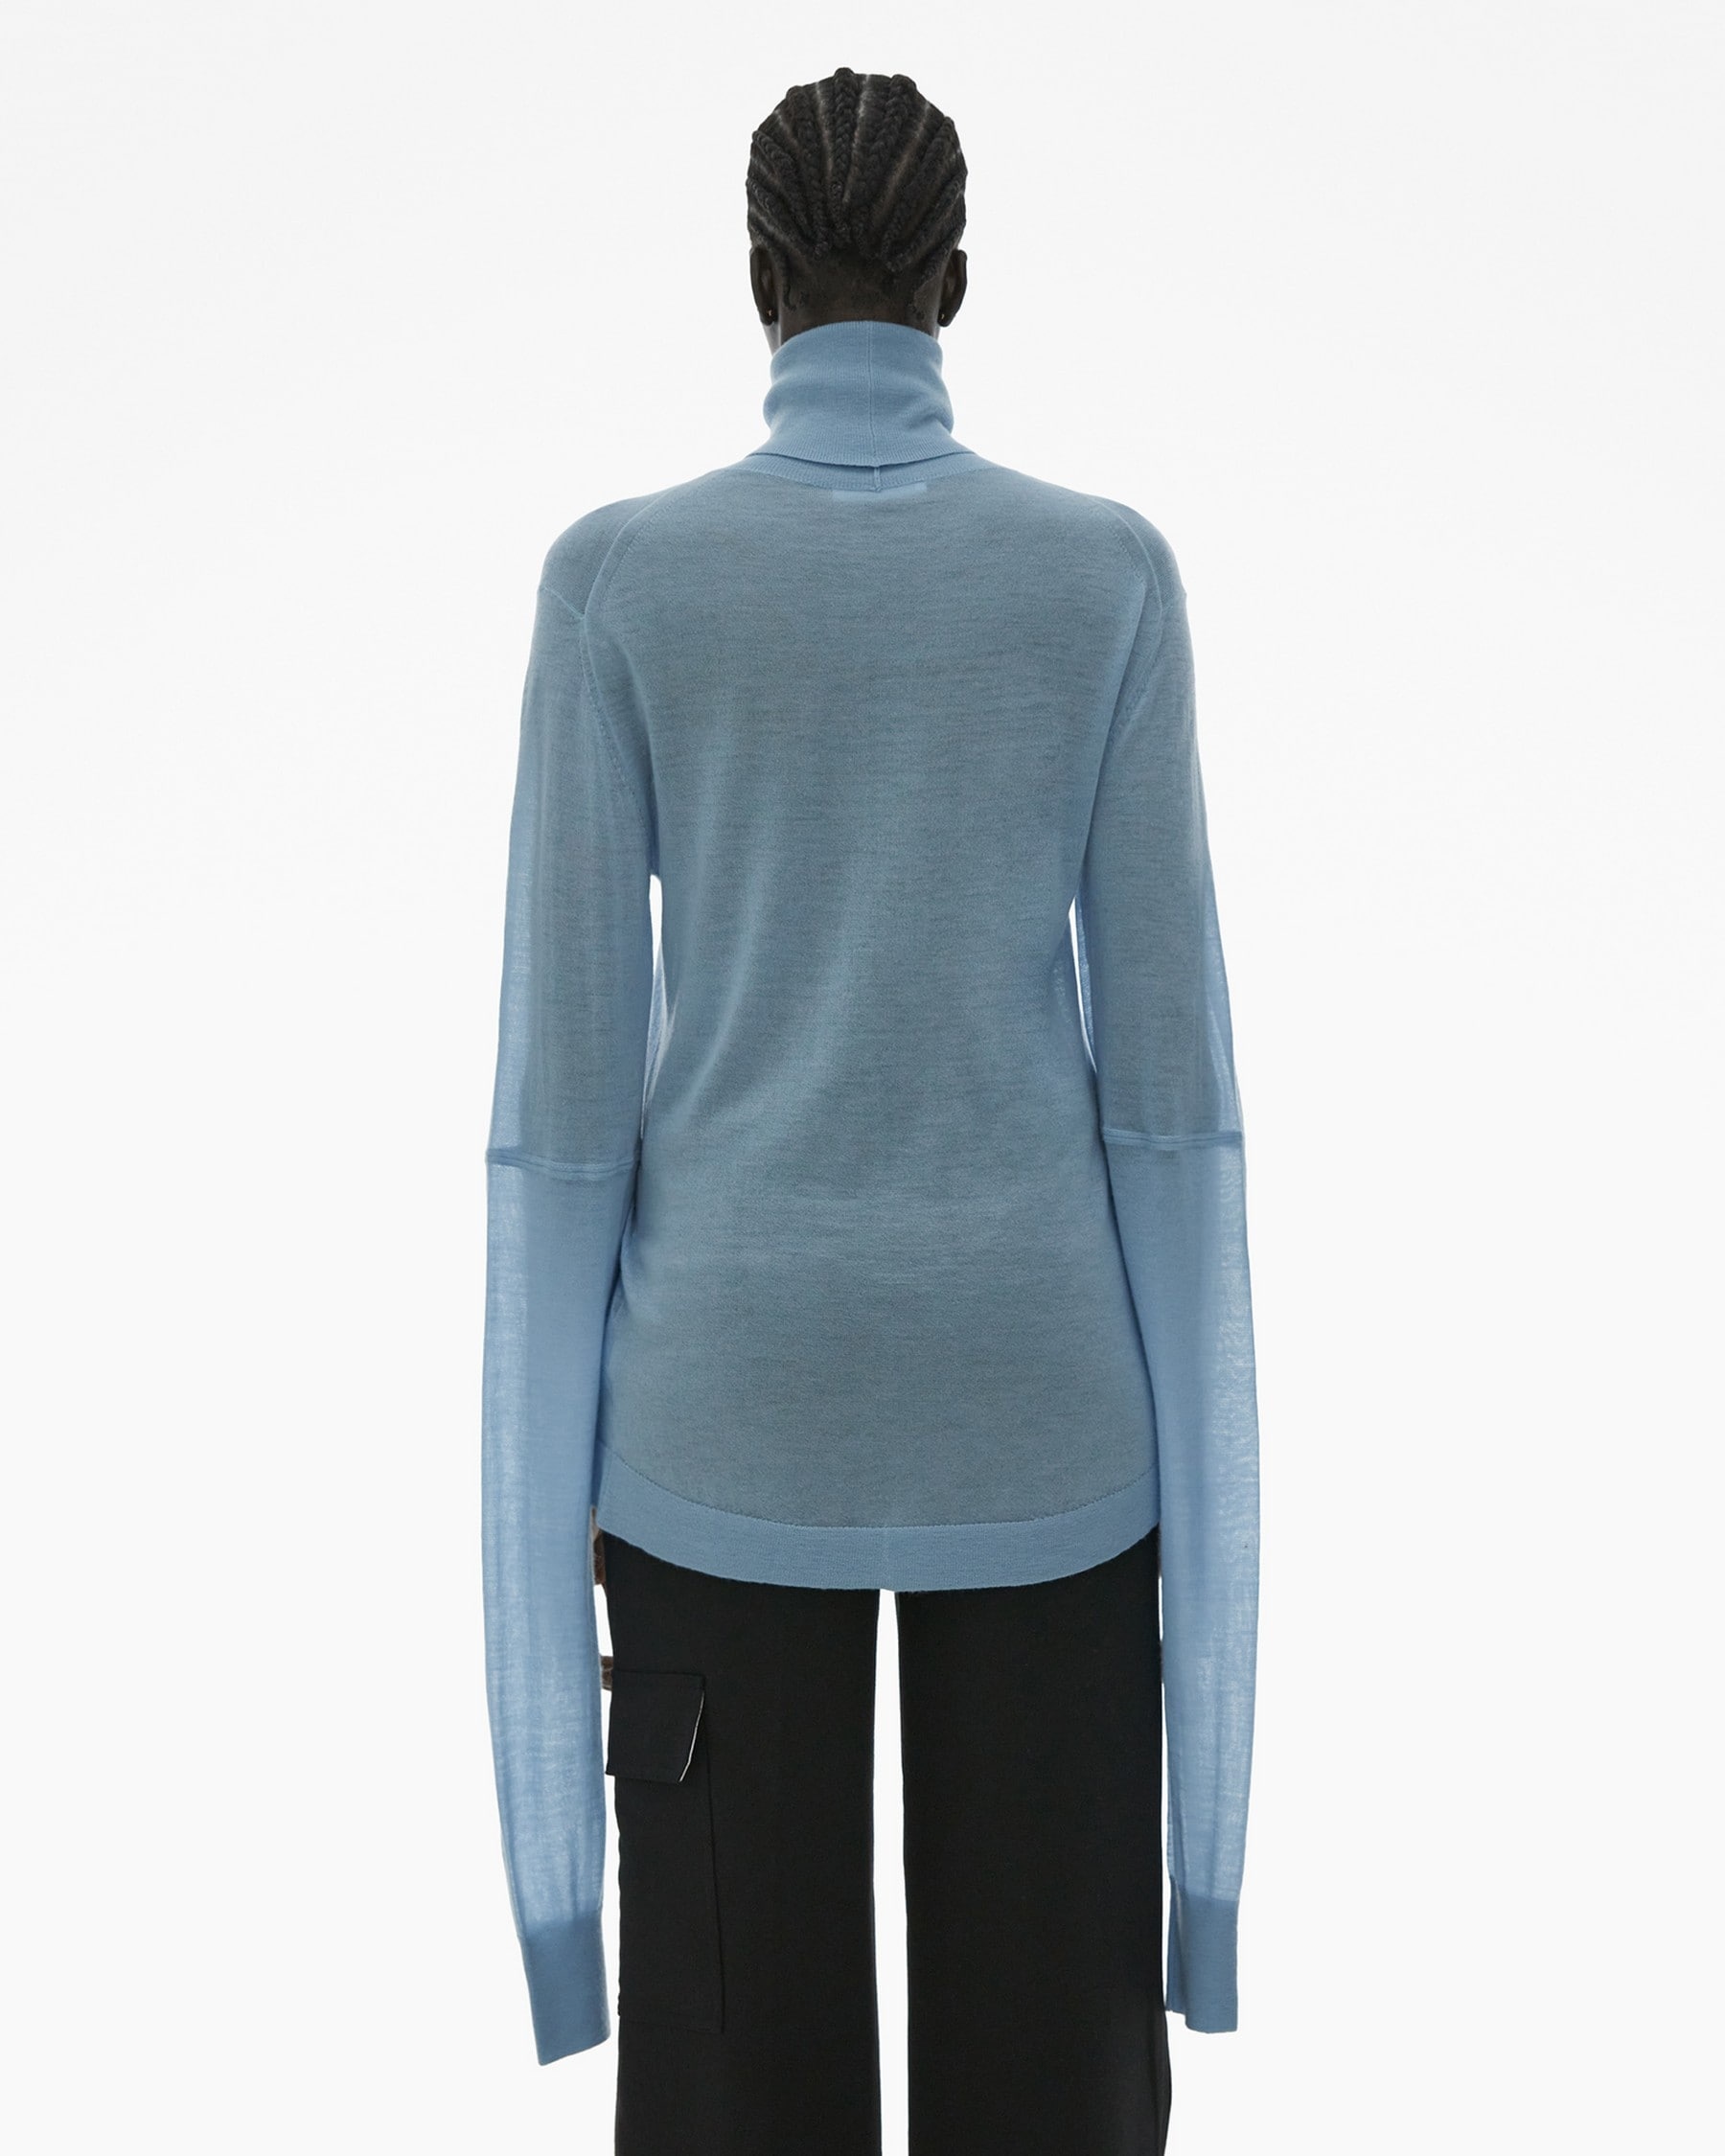 CUT-OUT TURTLENECK SWEATER - 4